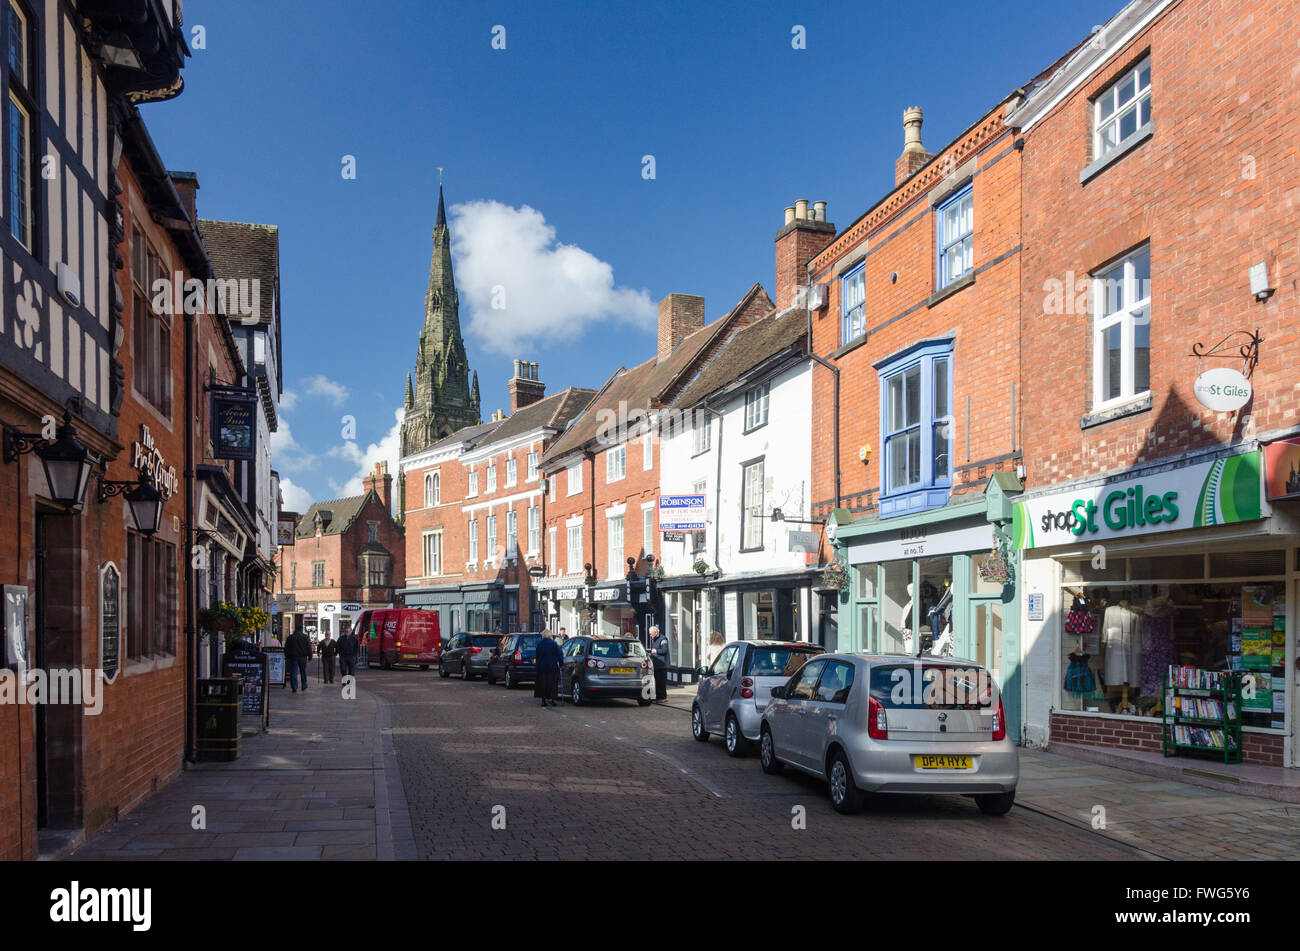 Shops and pubs in Tamworth Street, Lichfield, Staffordshire Stock Photo